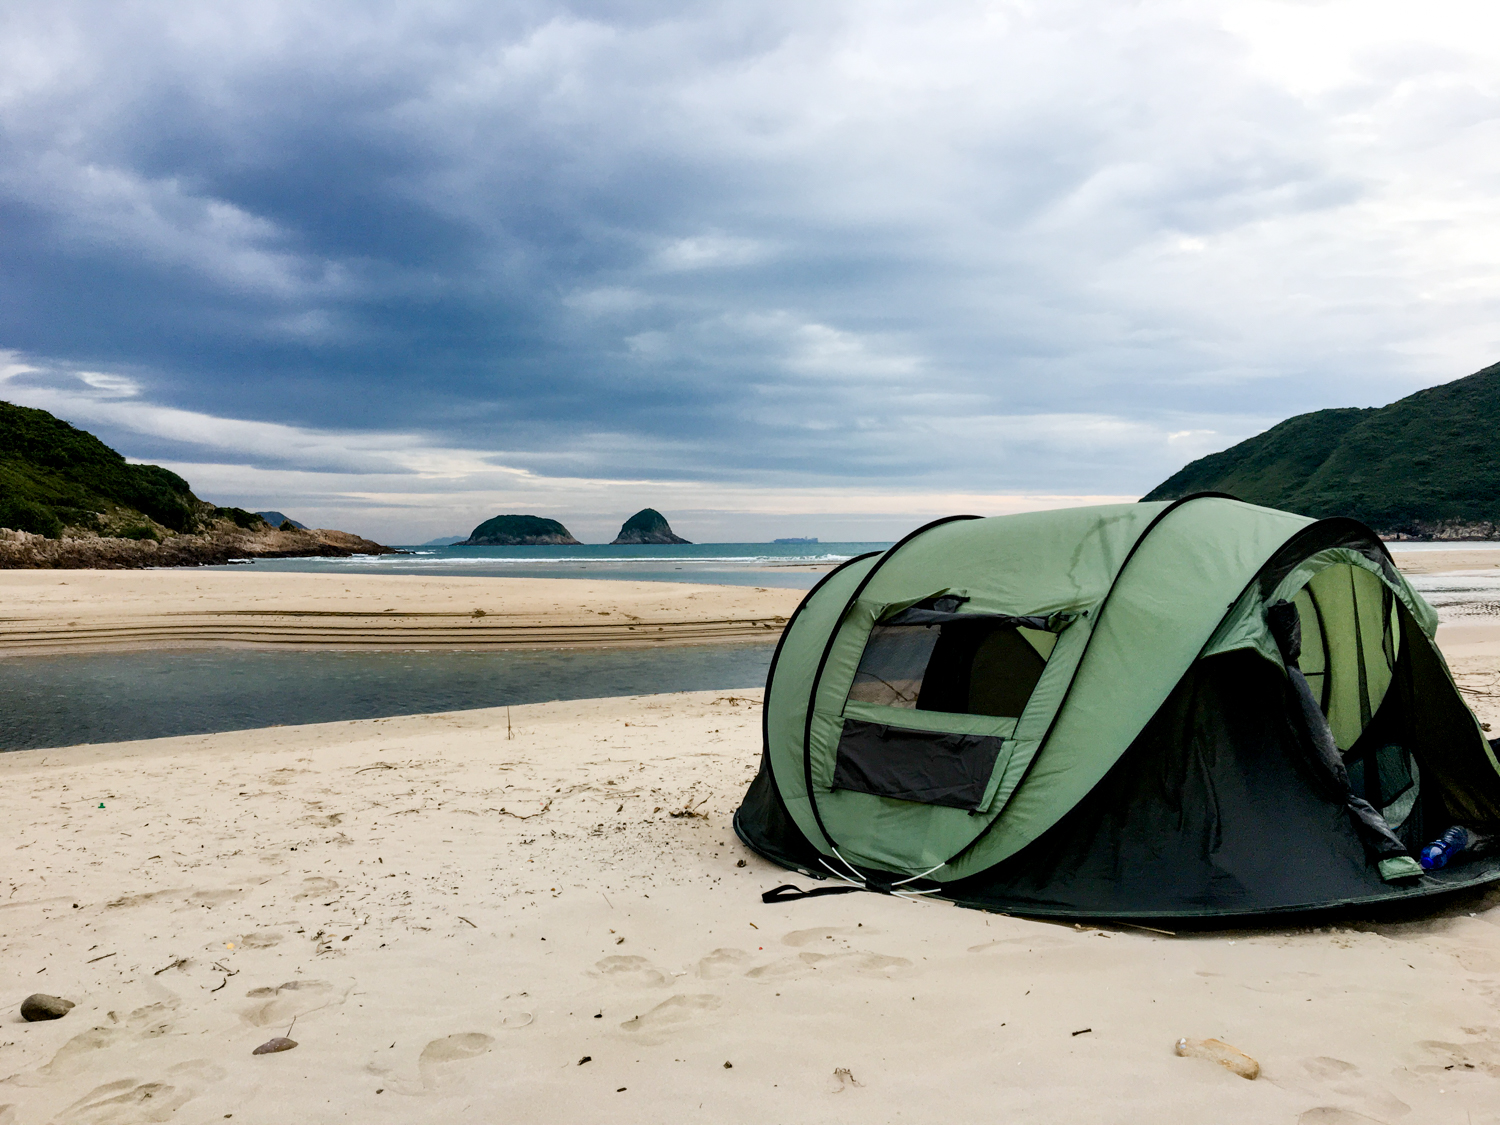 A camping tent on the beach